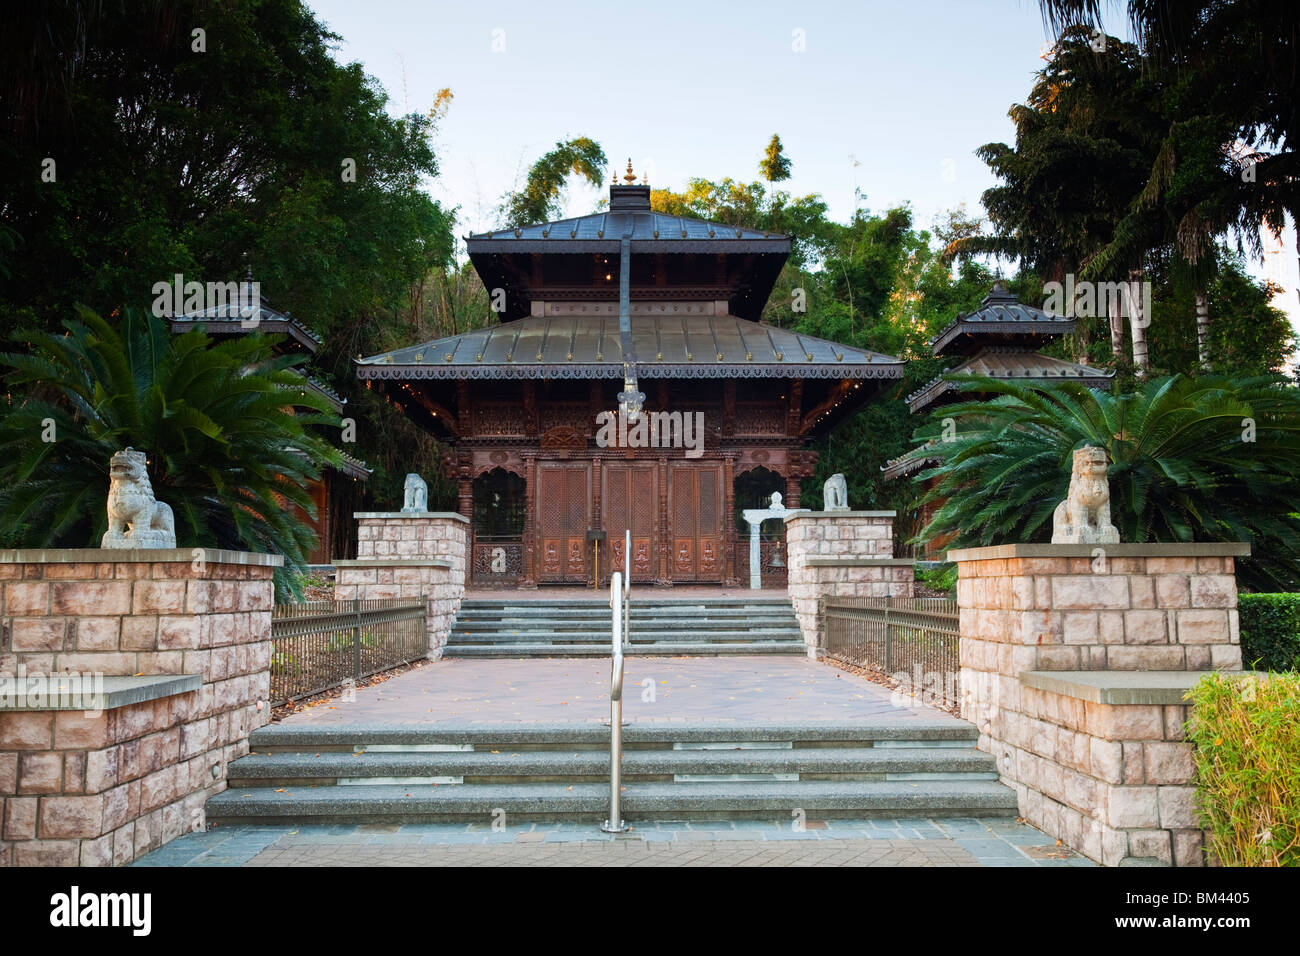 The Nepalese Peace Pagoda. South Bank, Brisbane, Queensland, Australia Stock Photo